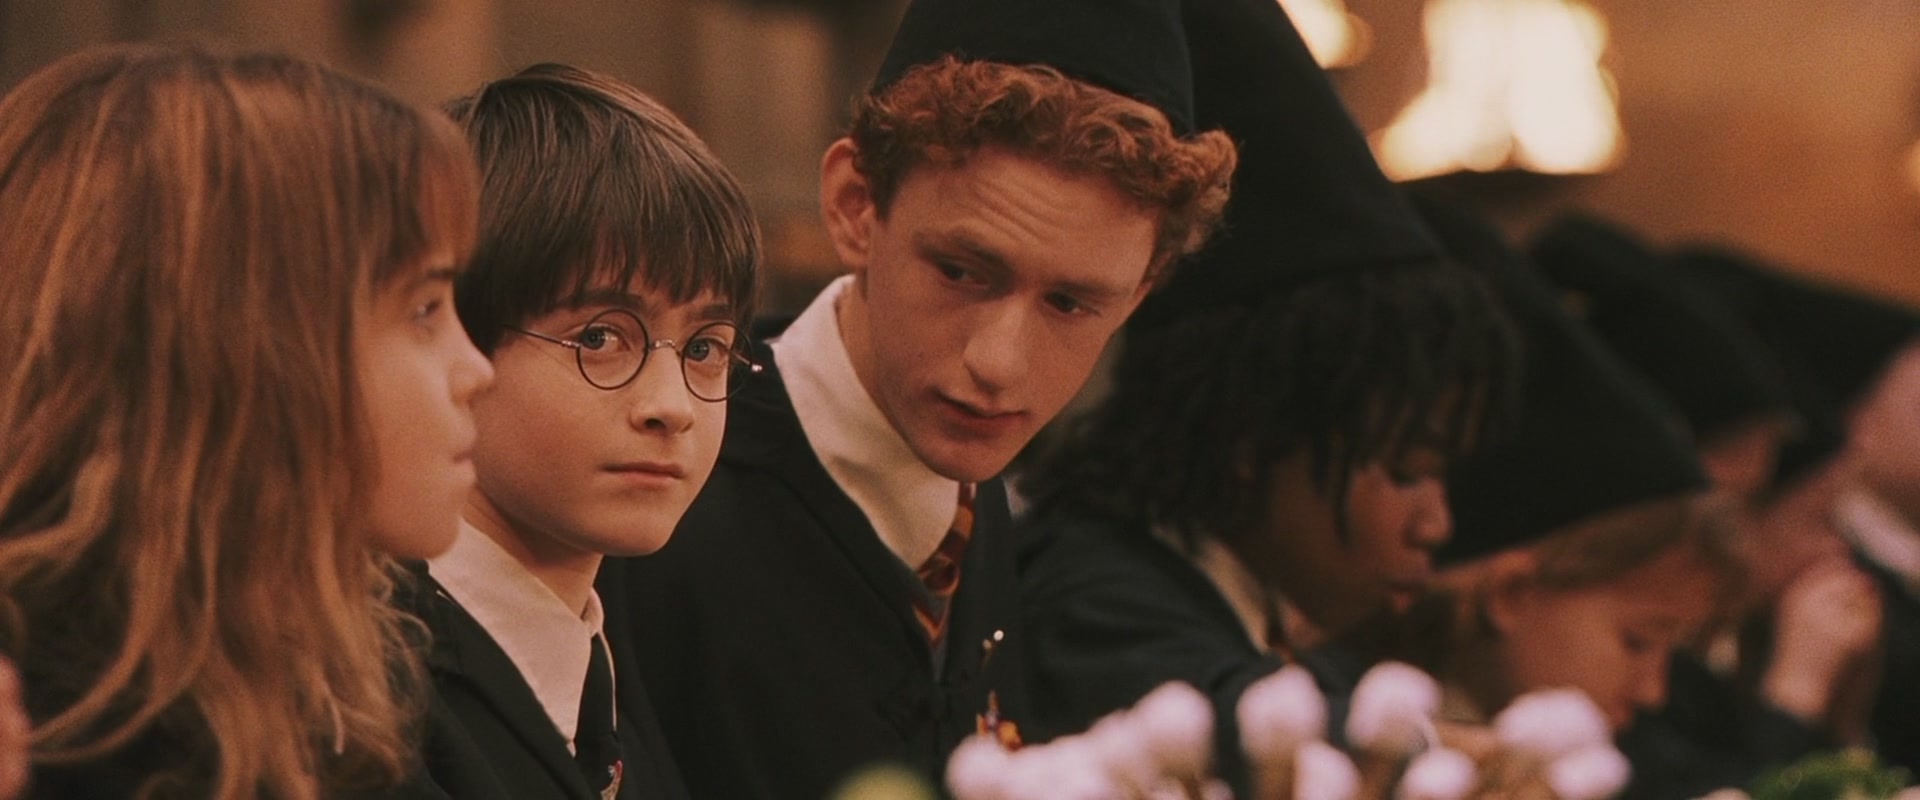 8 November 1983: Chris Rankin, the actor who played Percy Weasley, is born. Happy birthday 